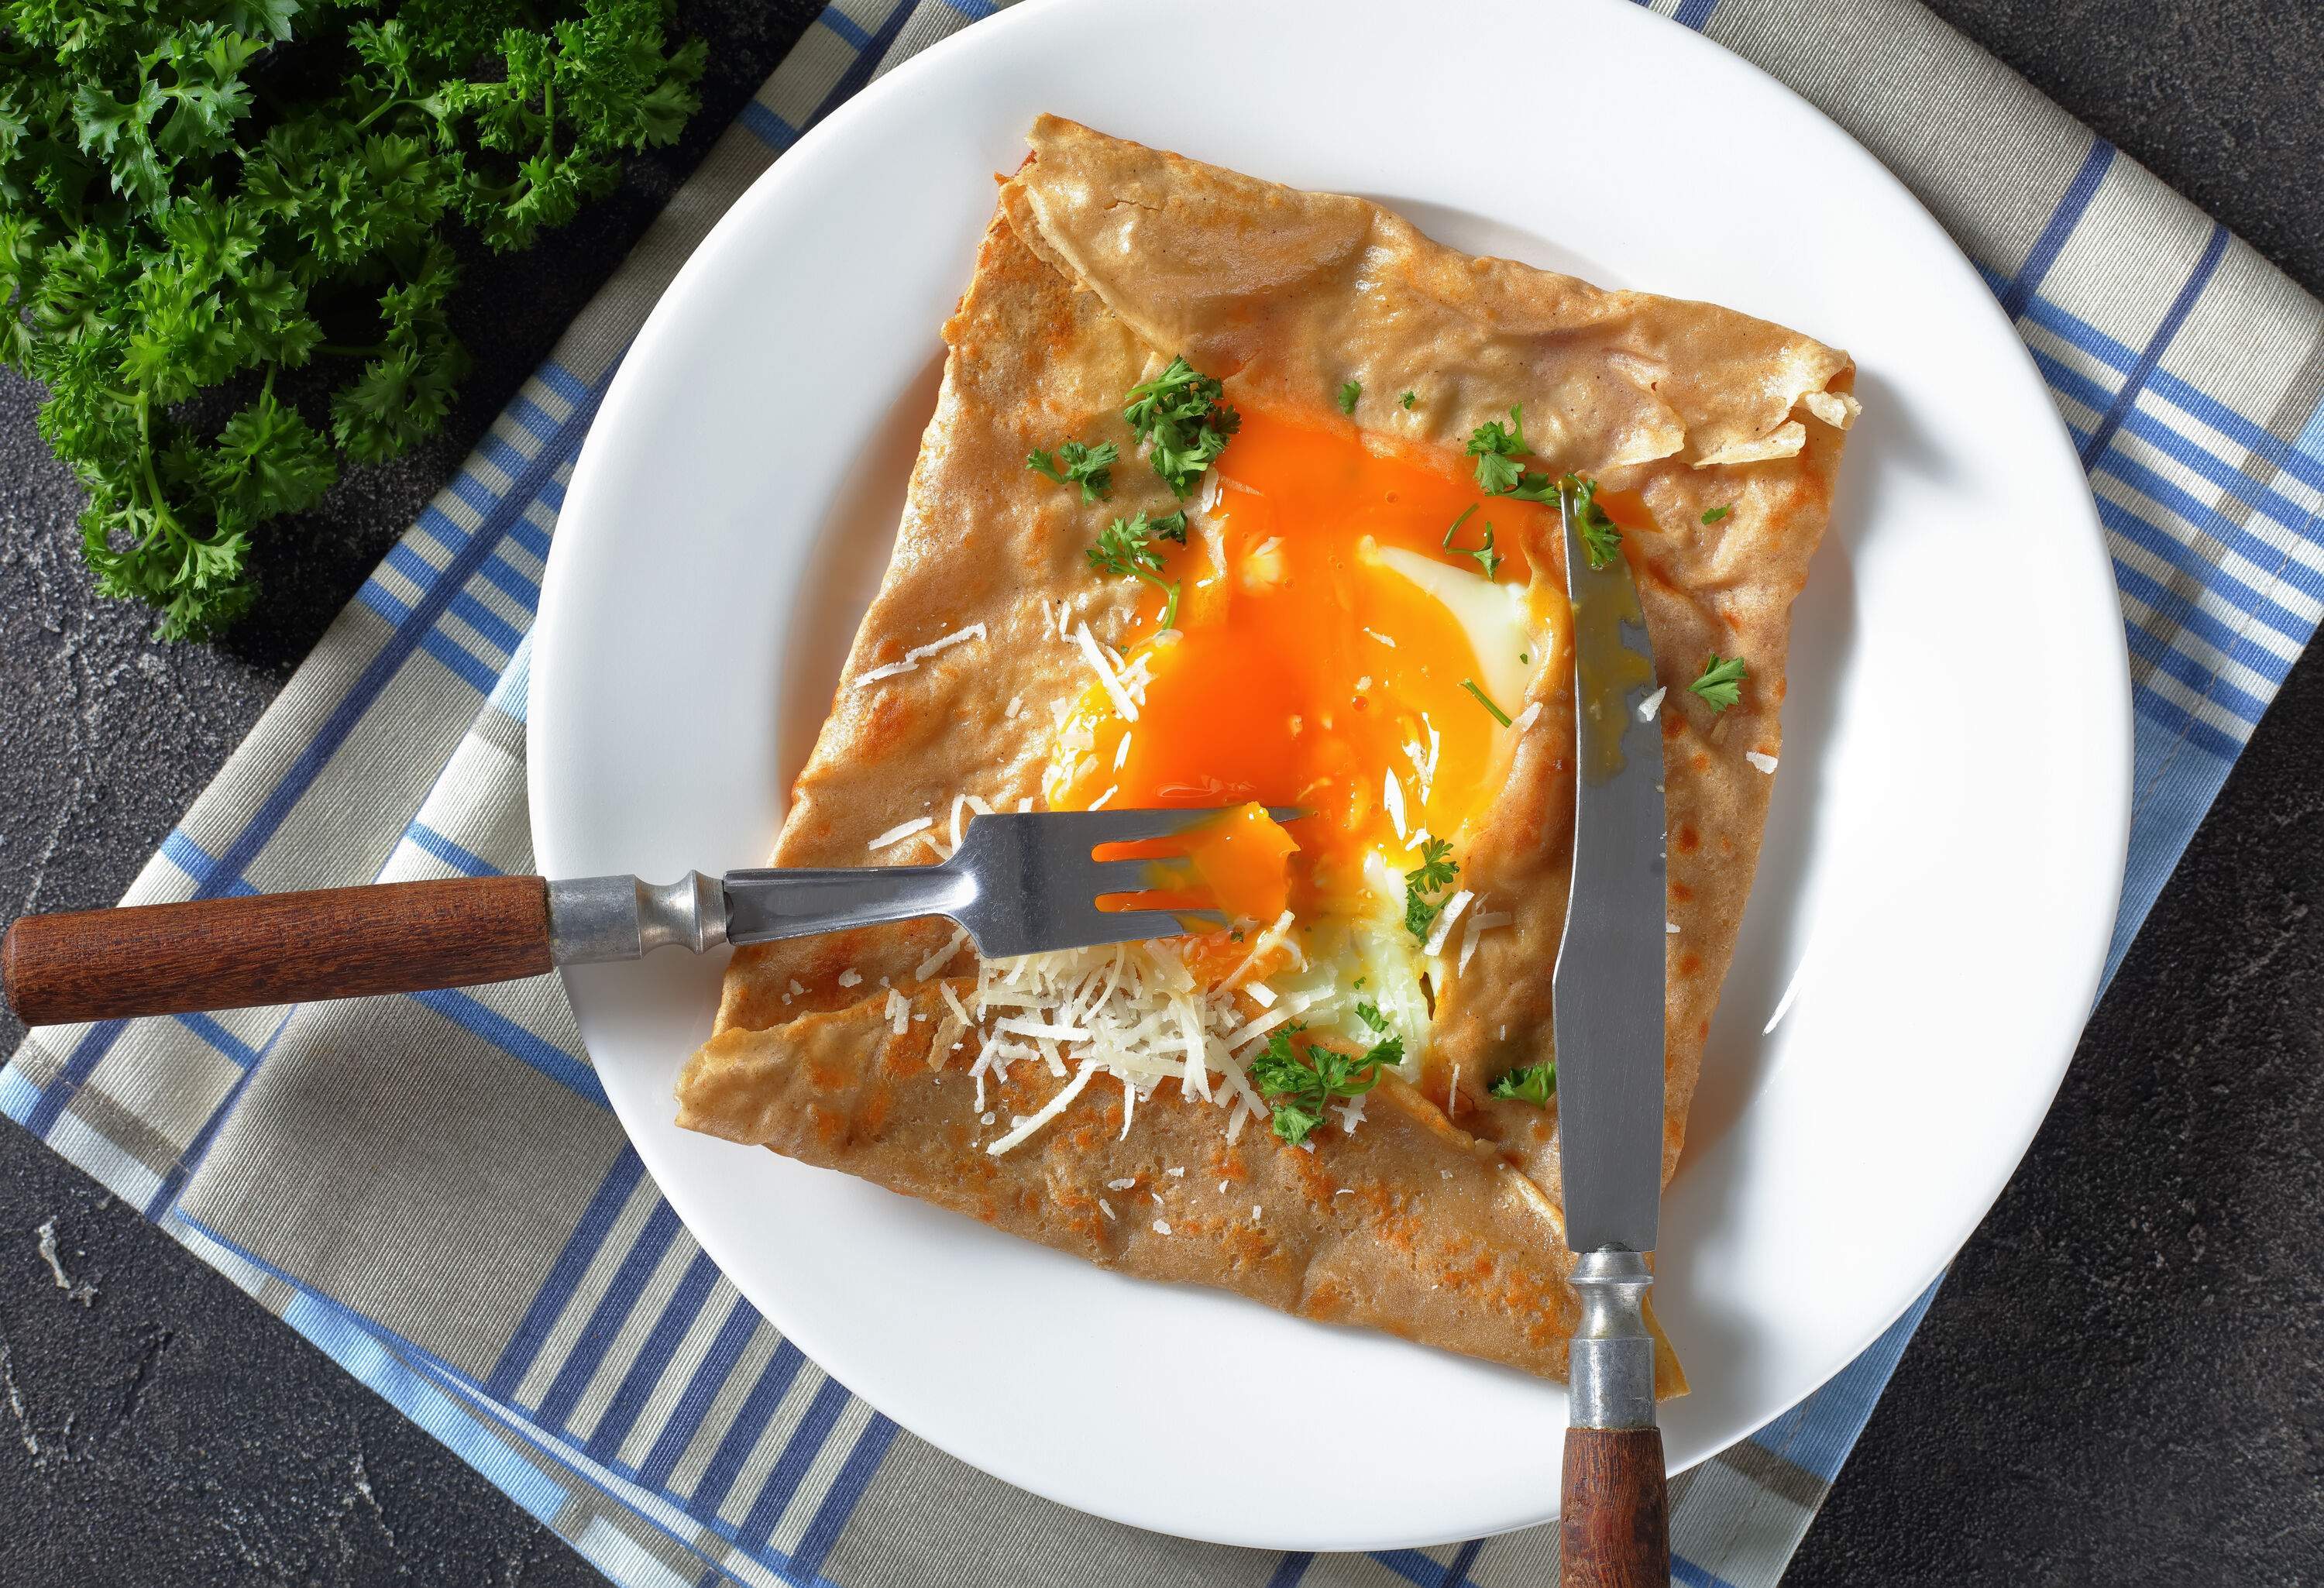 An egg galette garnished with finely chopped parsley and shredded cheese.